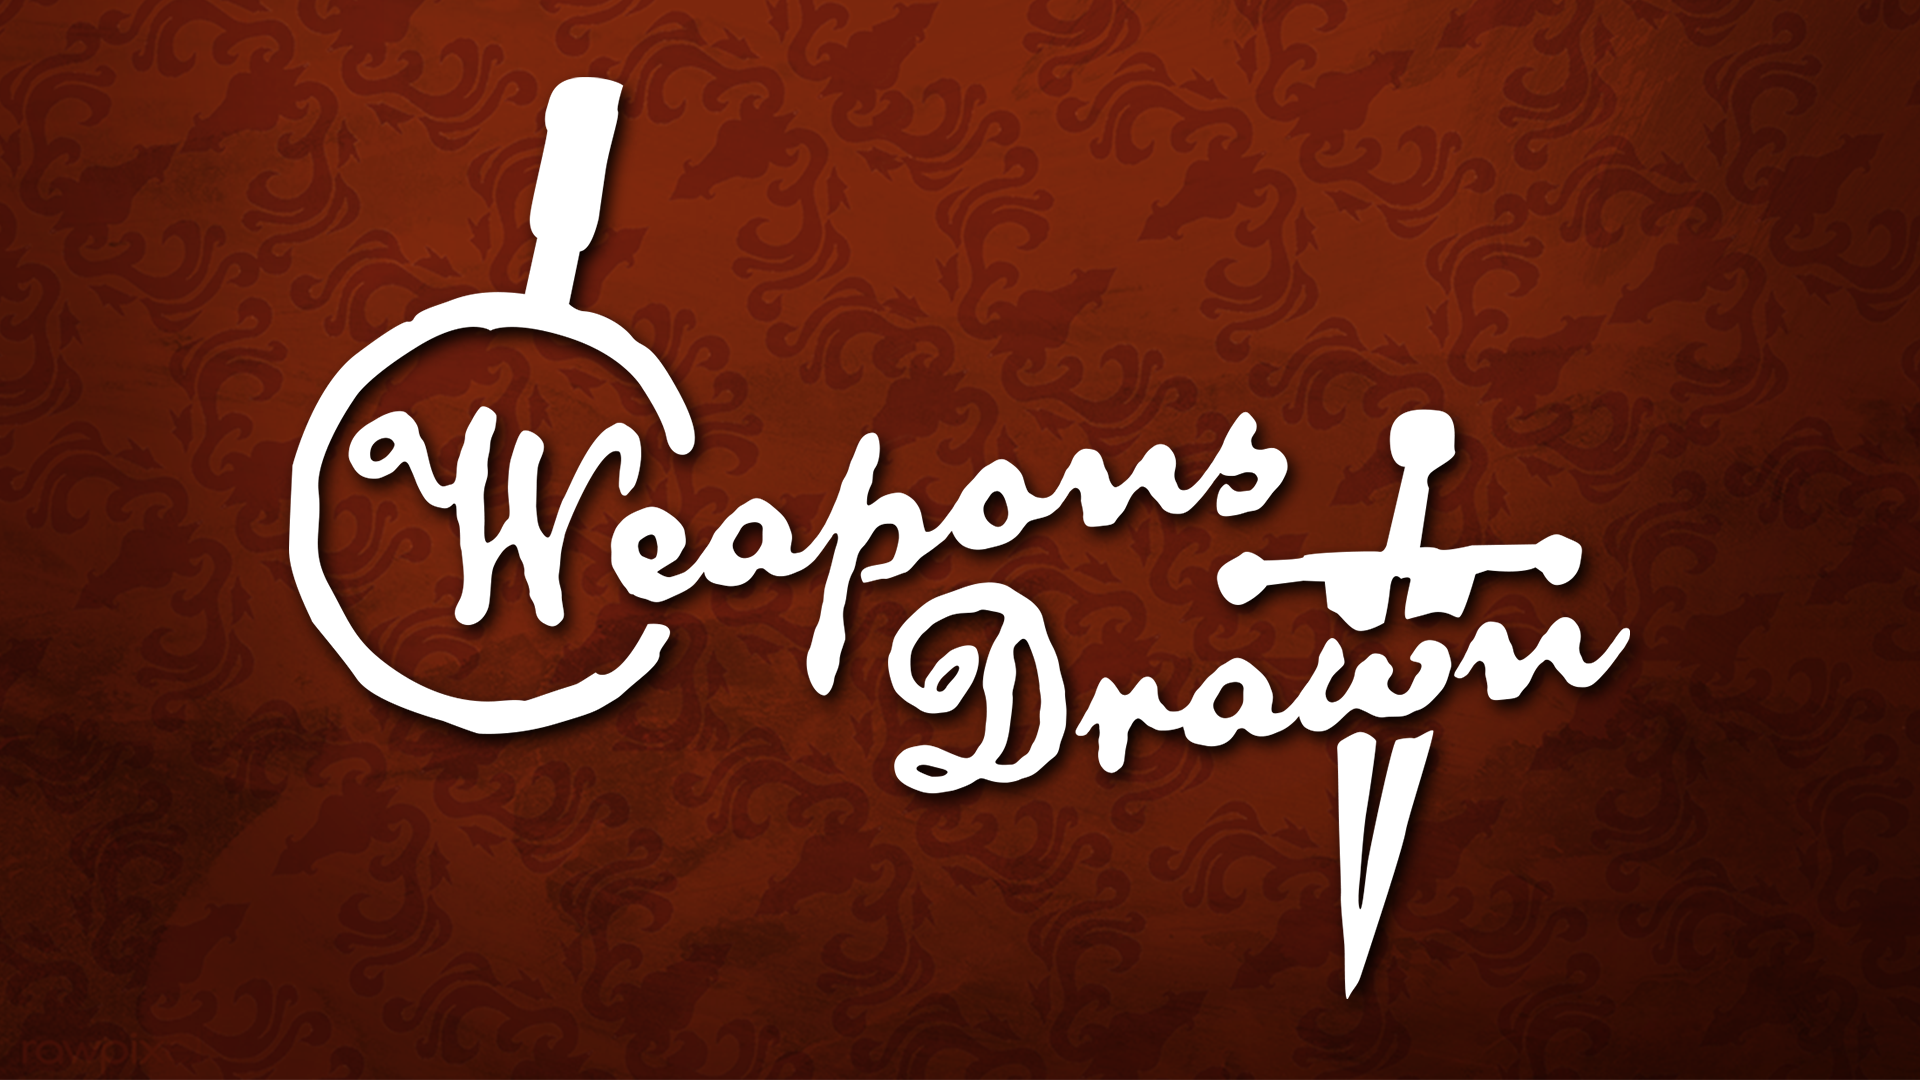 Weapons Drawn: Elementary